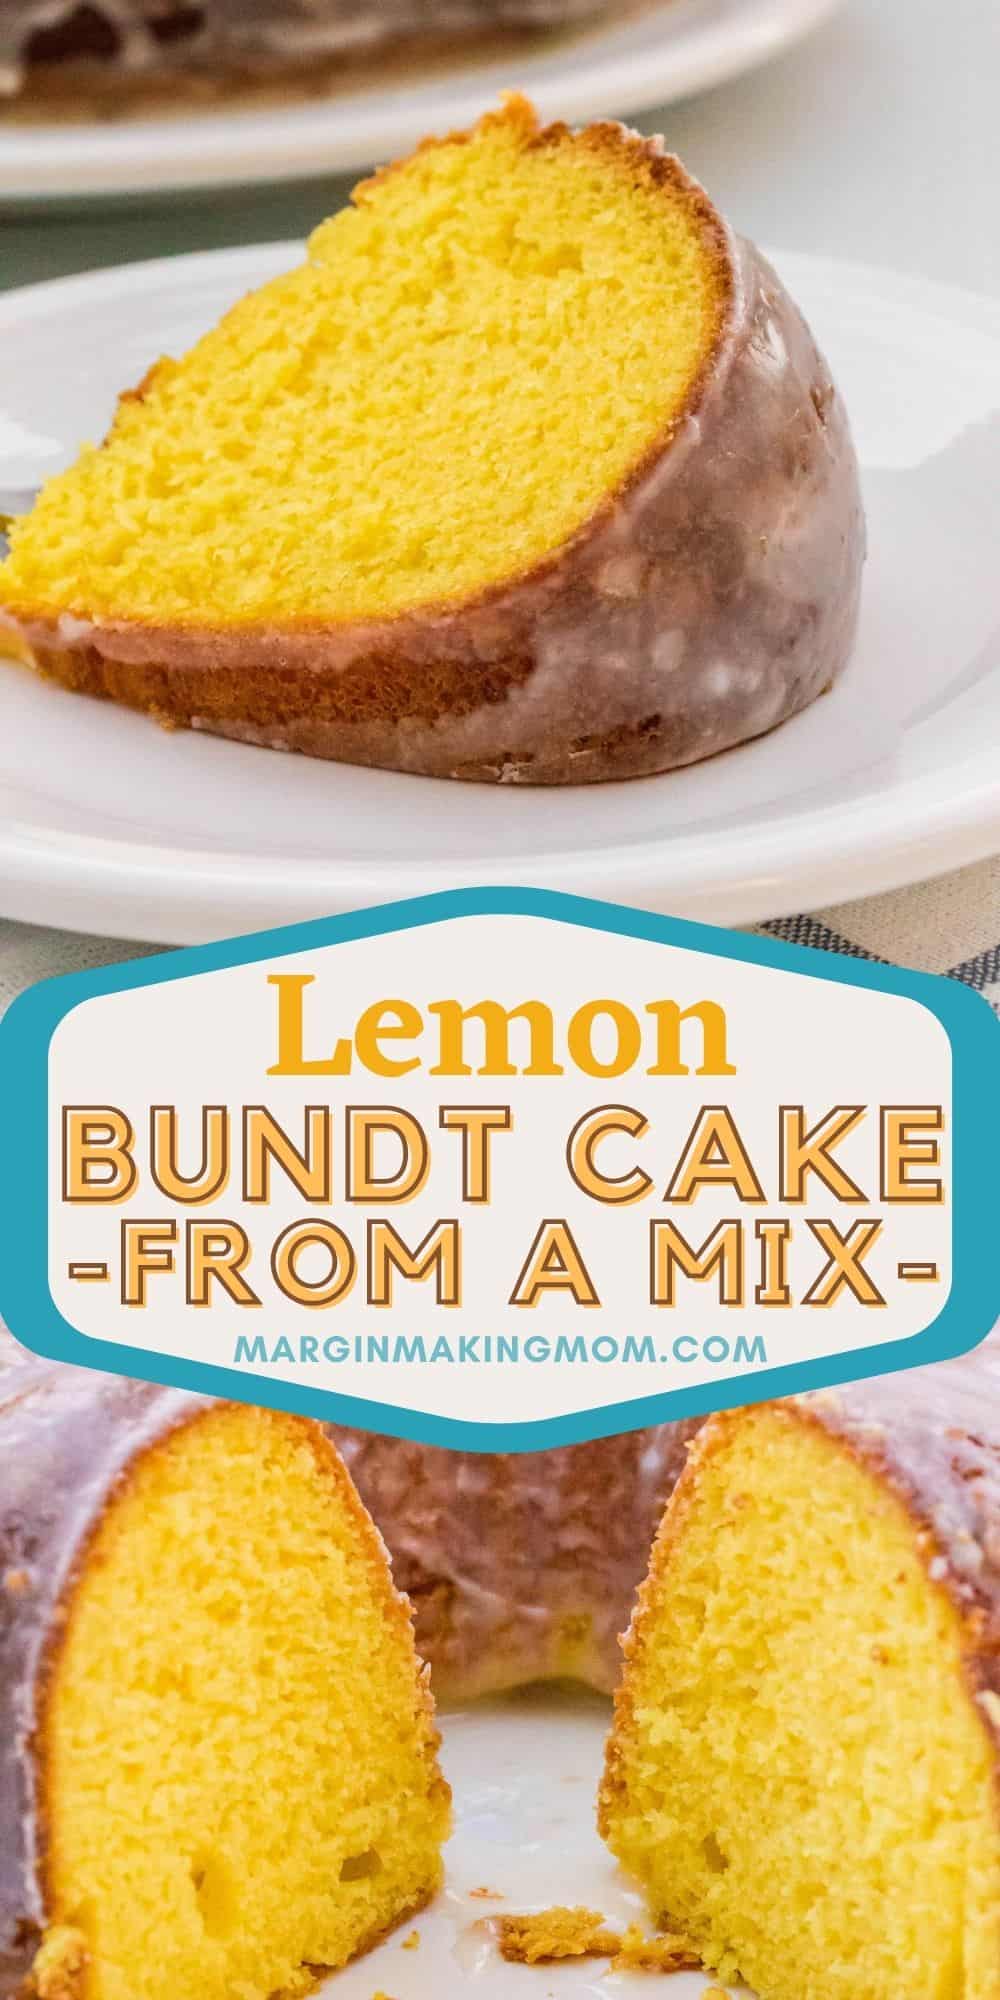 collage image featuring two photos of the glazed lemon bundt cake. One is of the cake with a couple of slices removed, the other is a slice on a white plate.